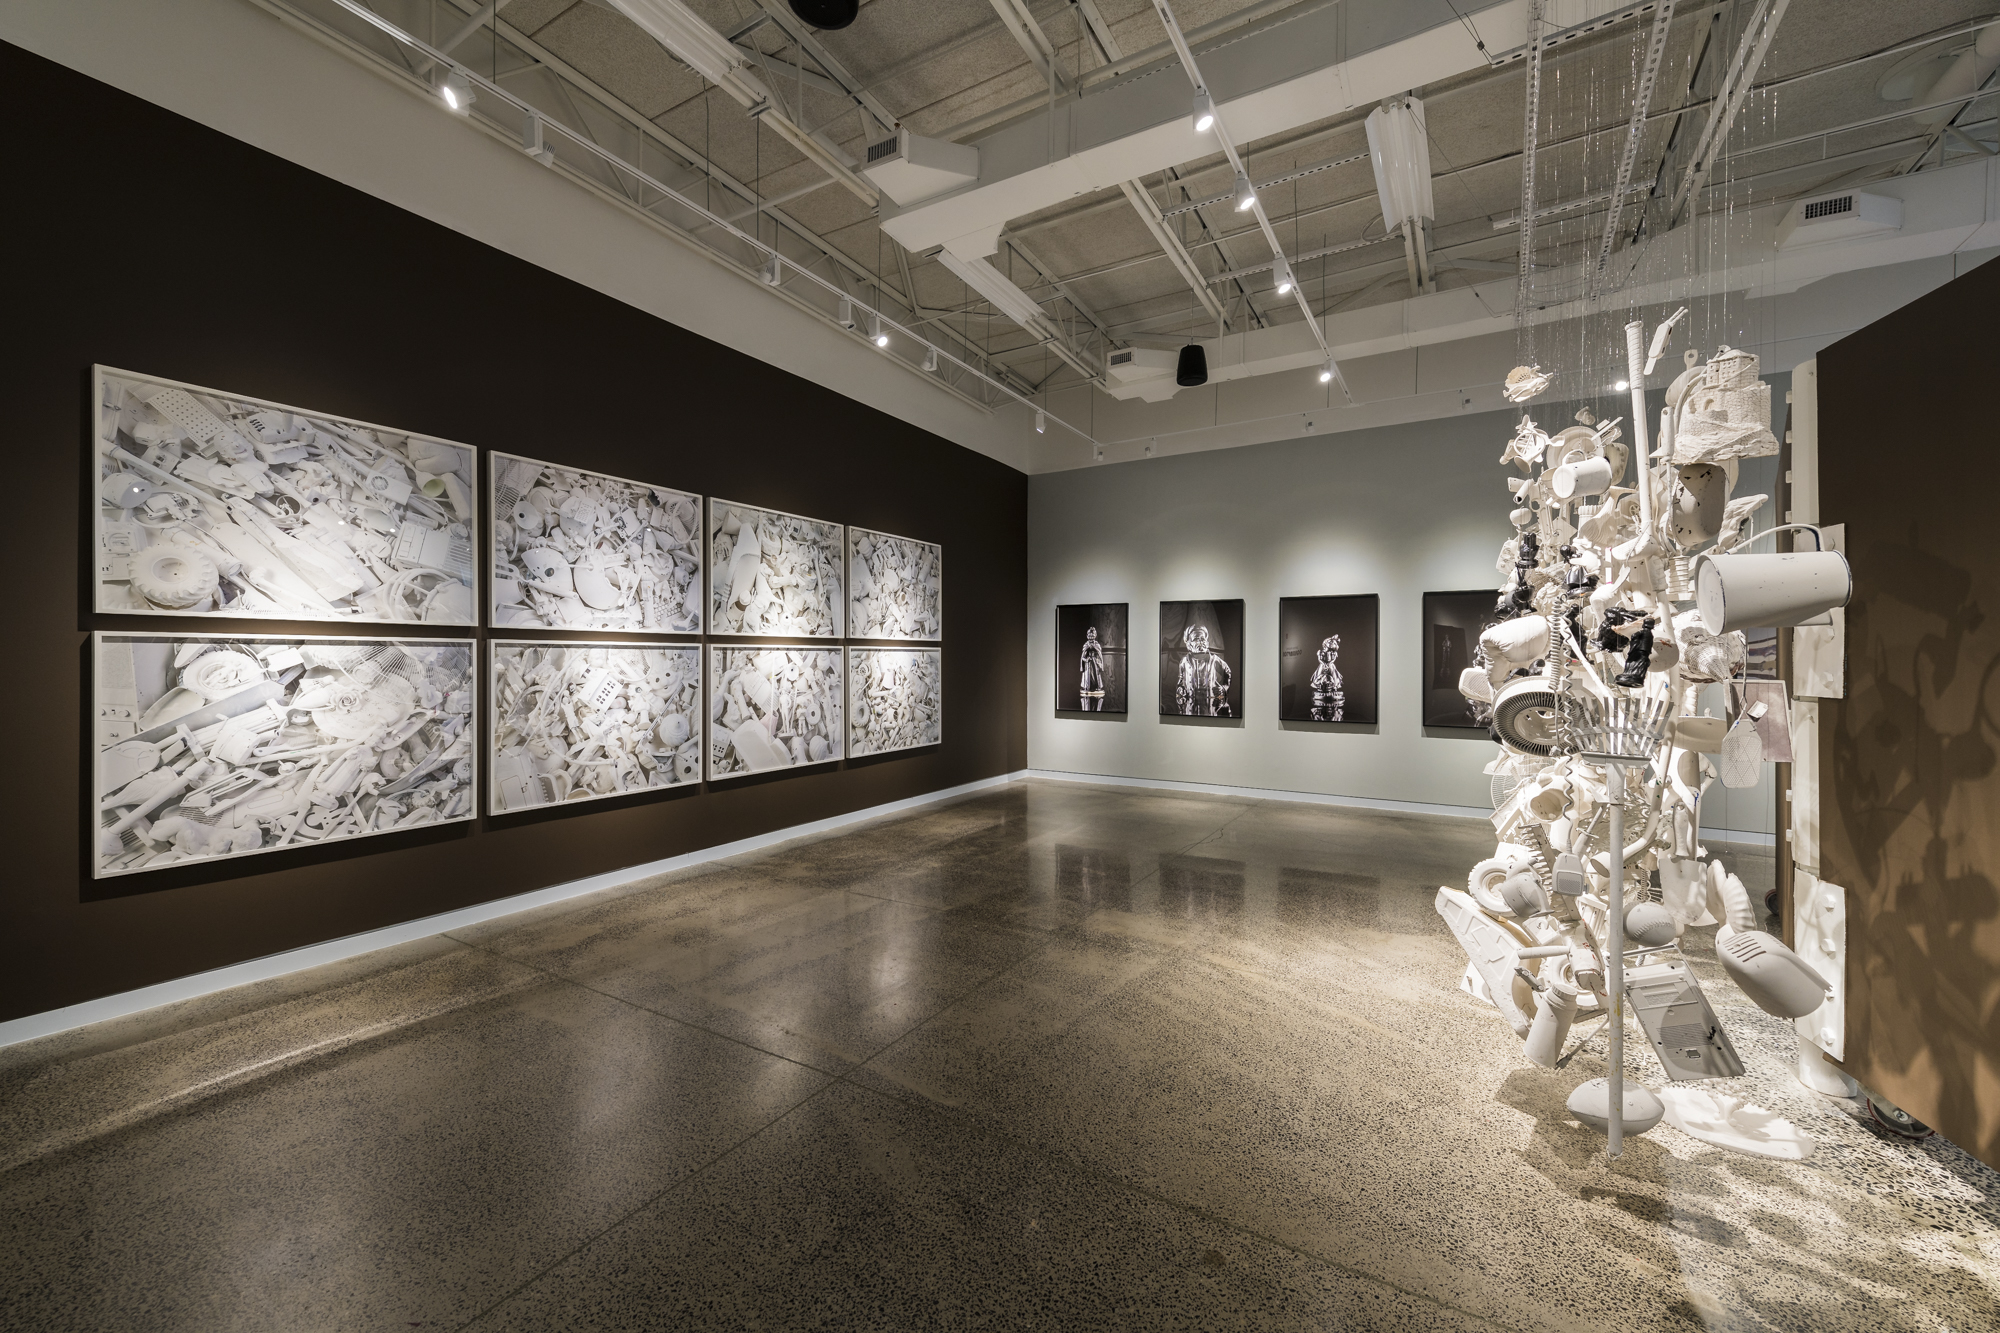 A gallery space with wooden floors and alternating wood and white walls with a six-panel abstract work hanging on one wall and a large white hanging sculpture made from household items hanging in the foreground 